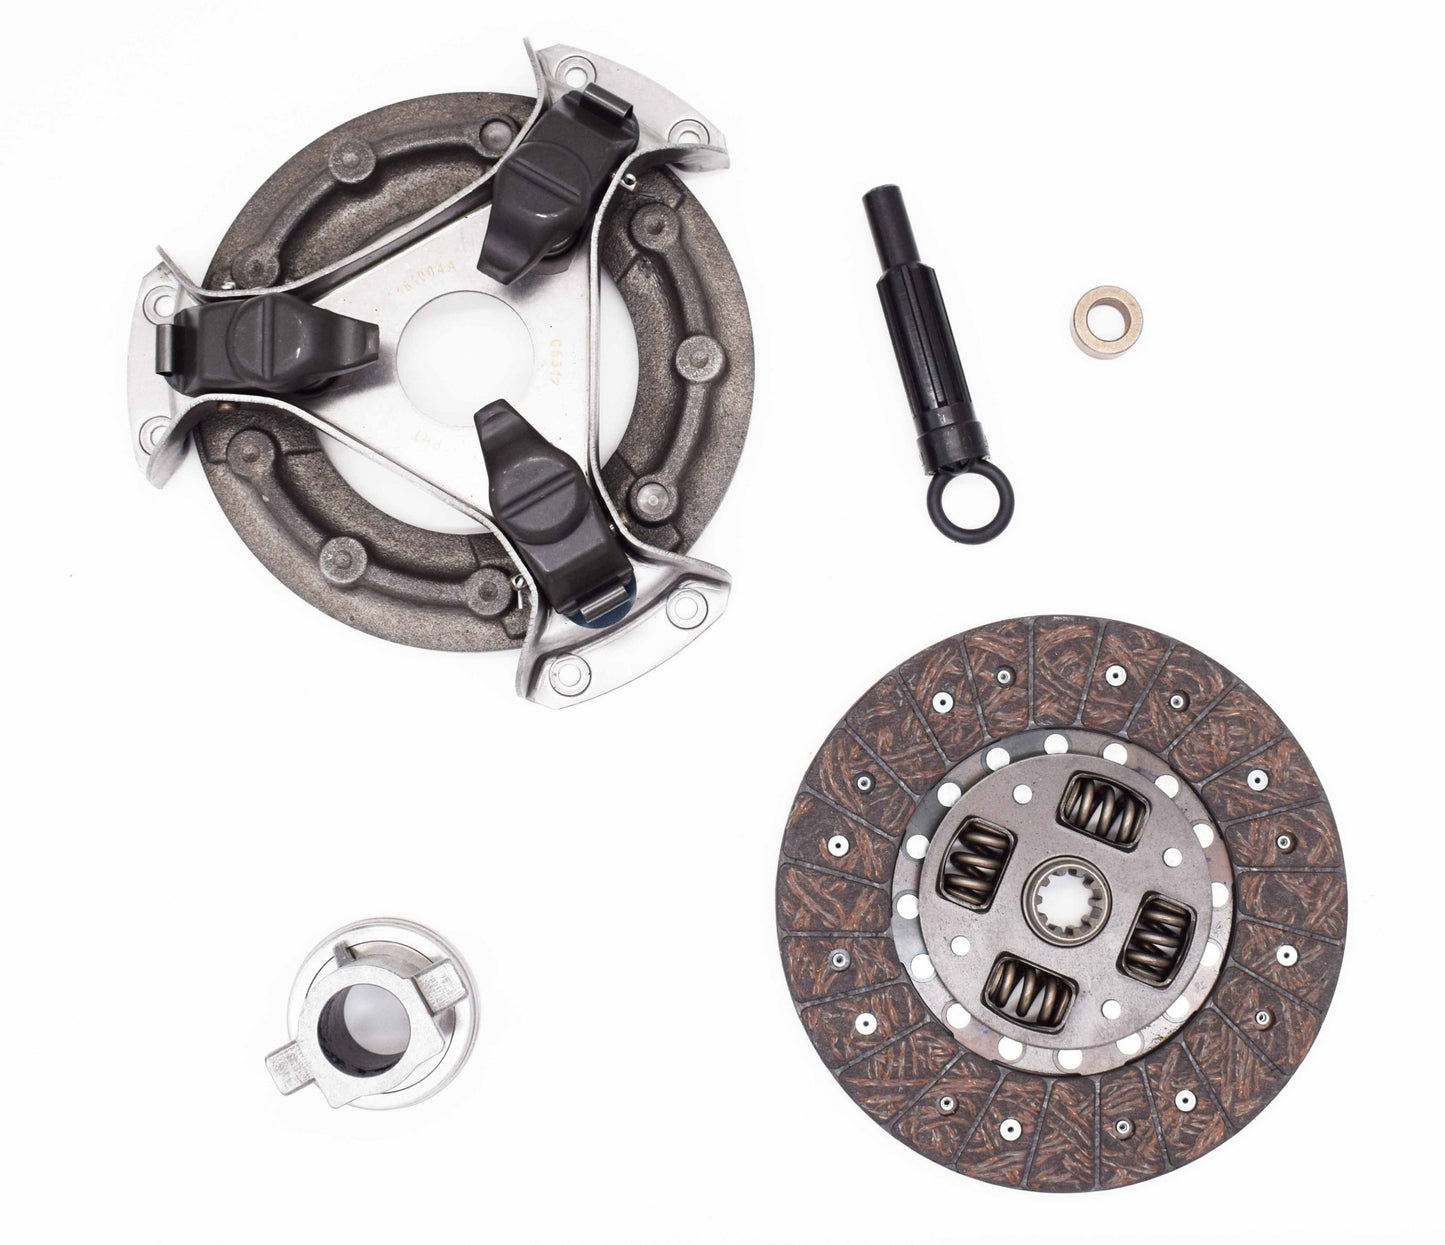 Clutch Kit, 8.5", 1941-1971, Willys and Jeep, 4-134 and 6-161 Engines - The JeepsterMan